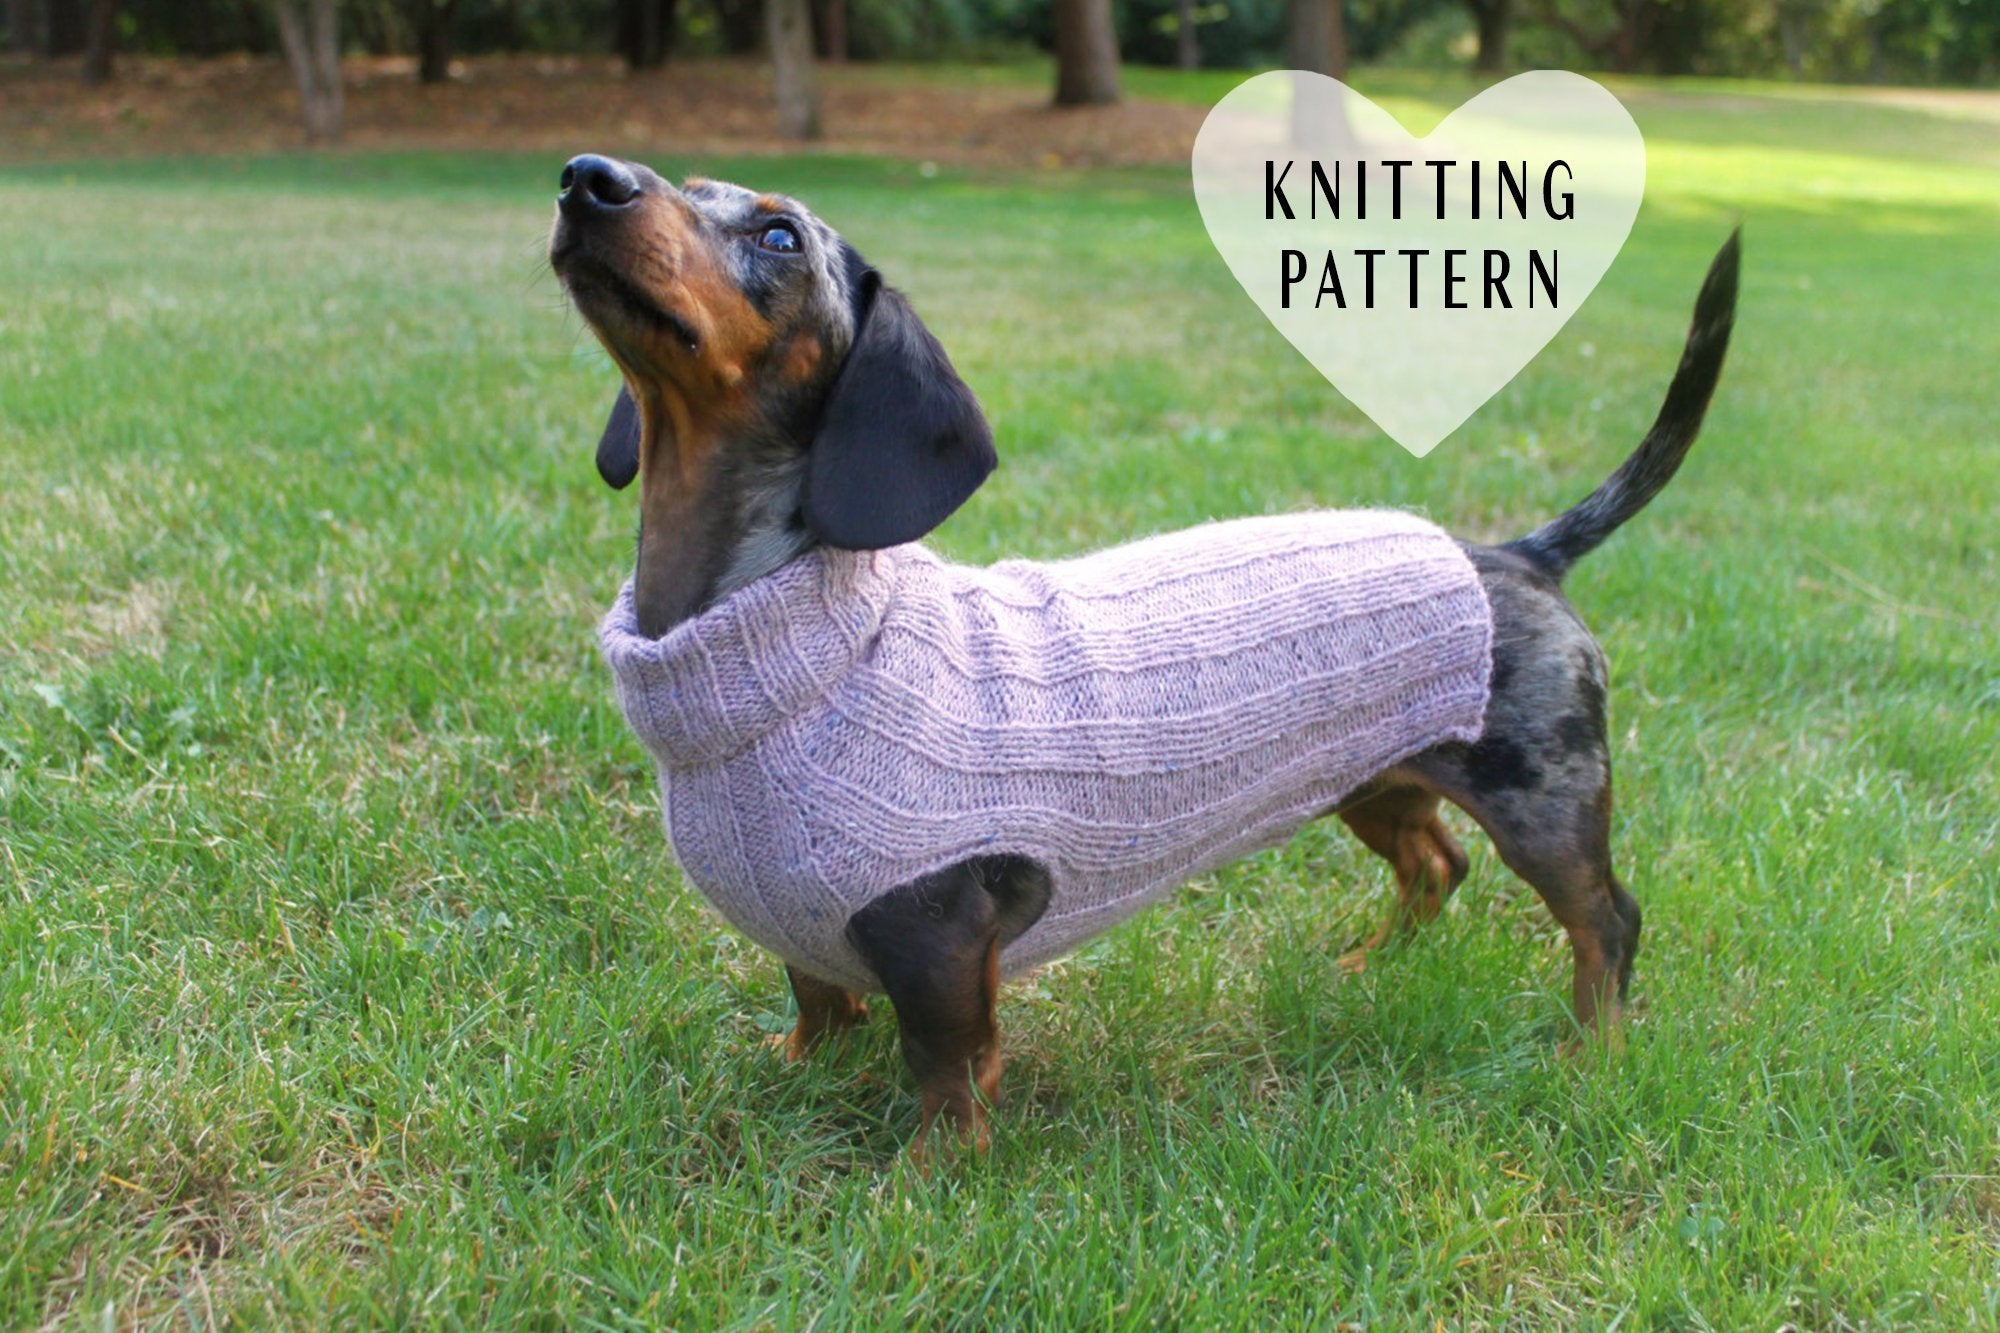 Dachshund Jumper Knitting Pattern Knitting Pattern Top Down Mini Dachshund Dog Sweater Pet Clothes Dogs Little Dog Diy Project Knit Knitted Doxie Wiener Dog Pets